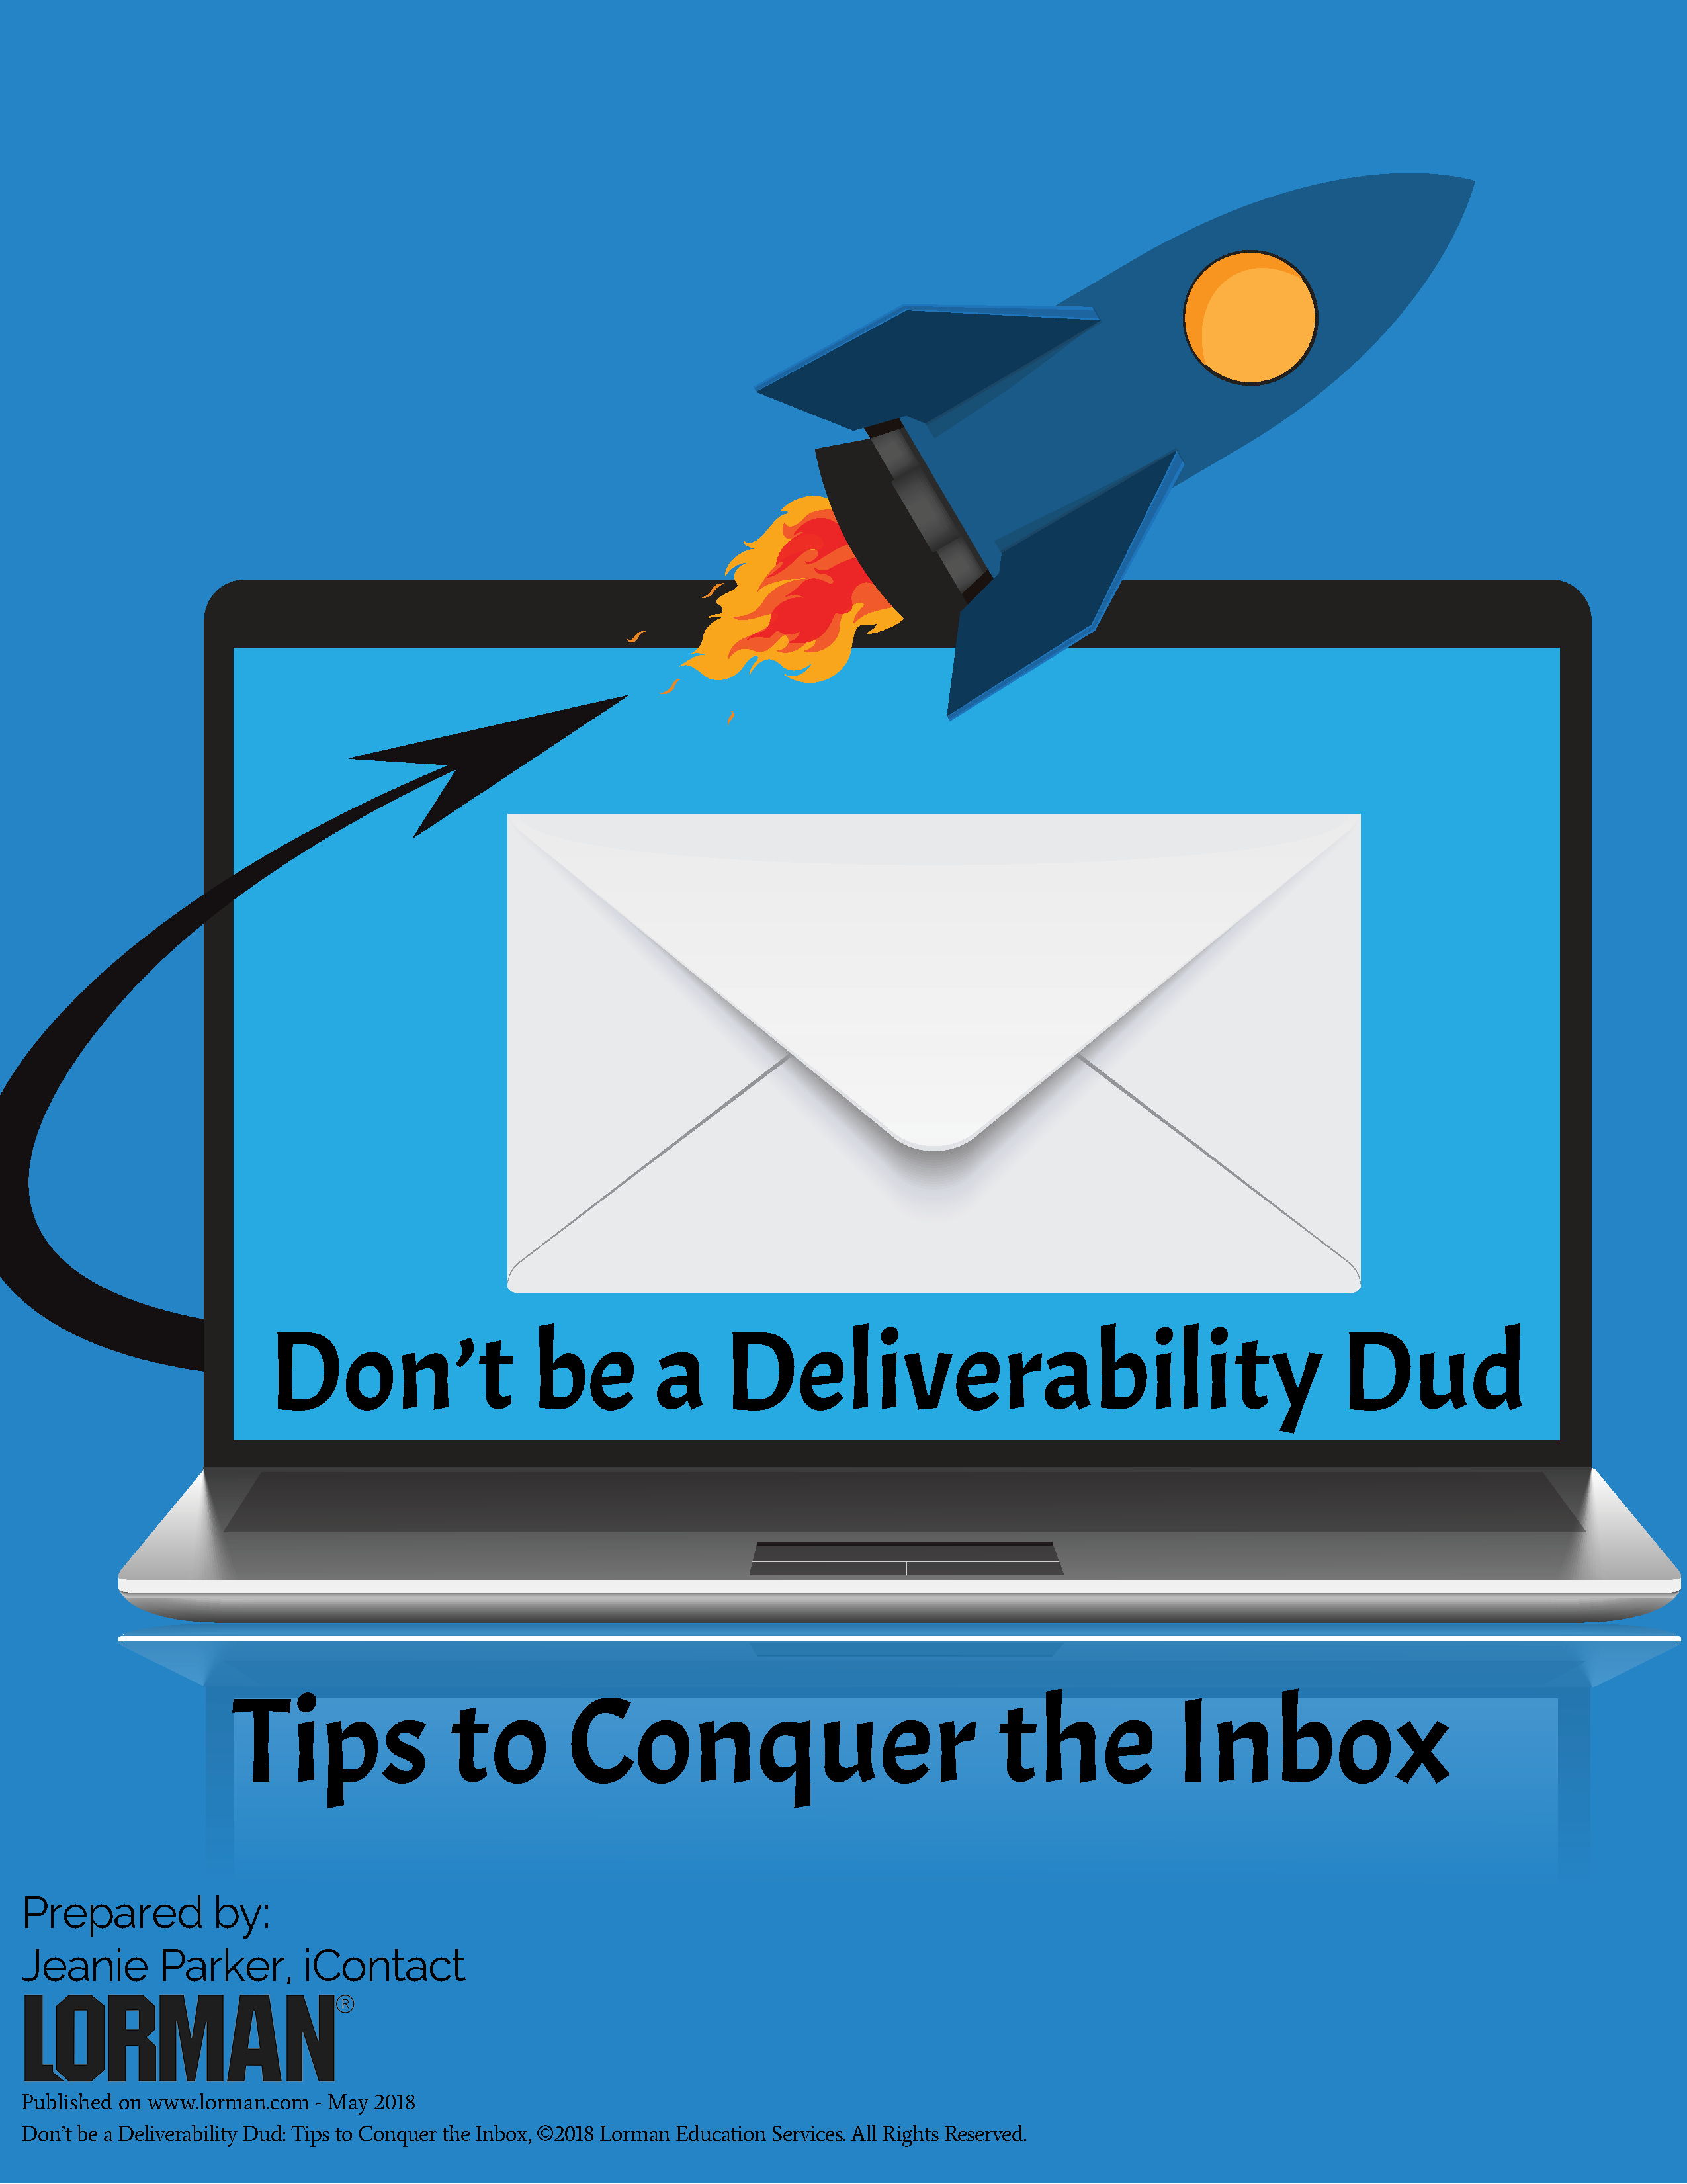 Don’t be a Deliverability Dud: Tips to Conquer the Inbox